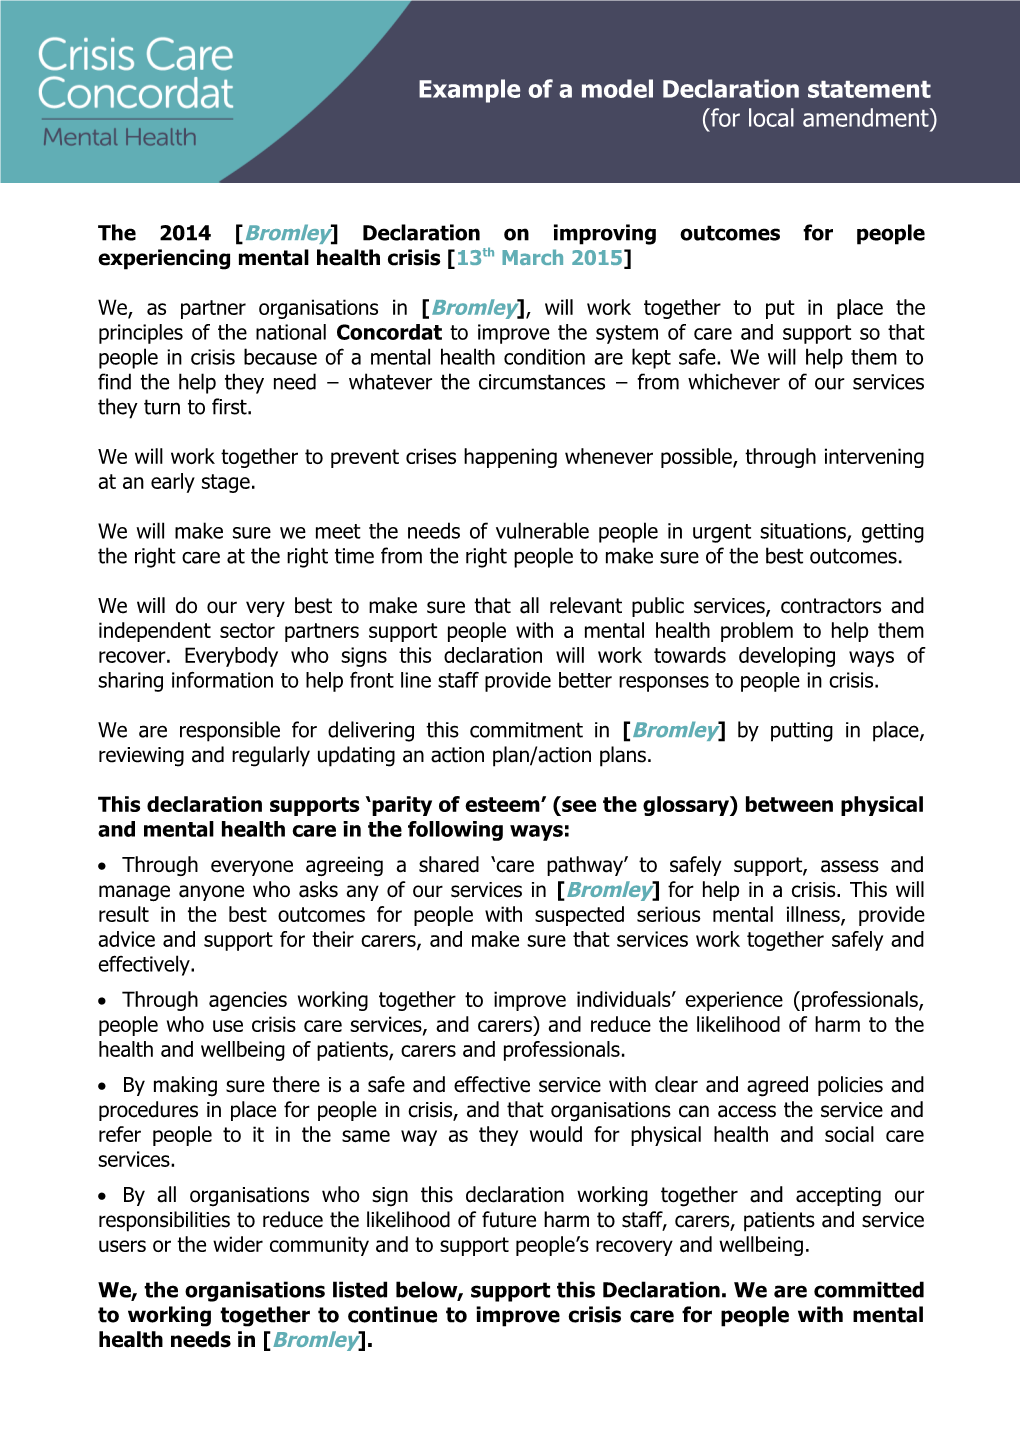 The 2014 Bromley Declaration on Improving Outcomes for People Experiencing Mental Health